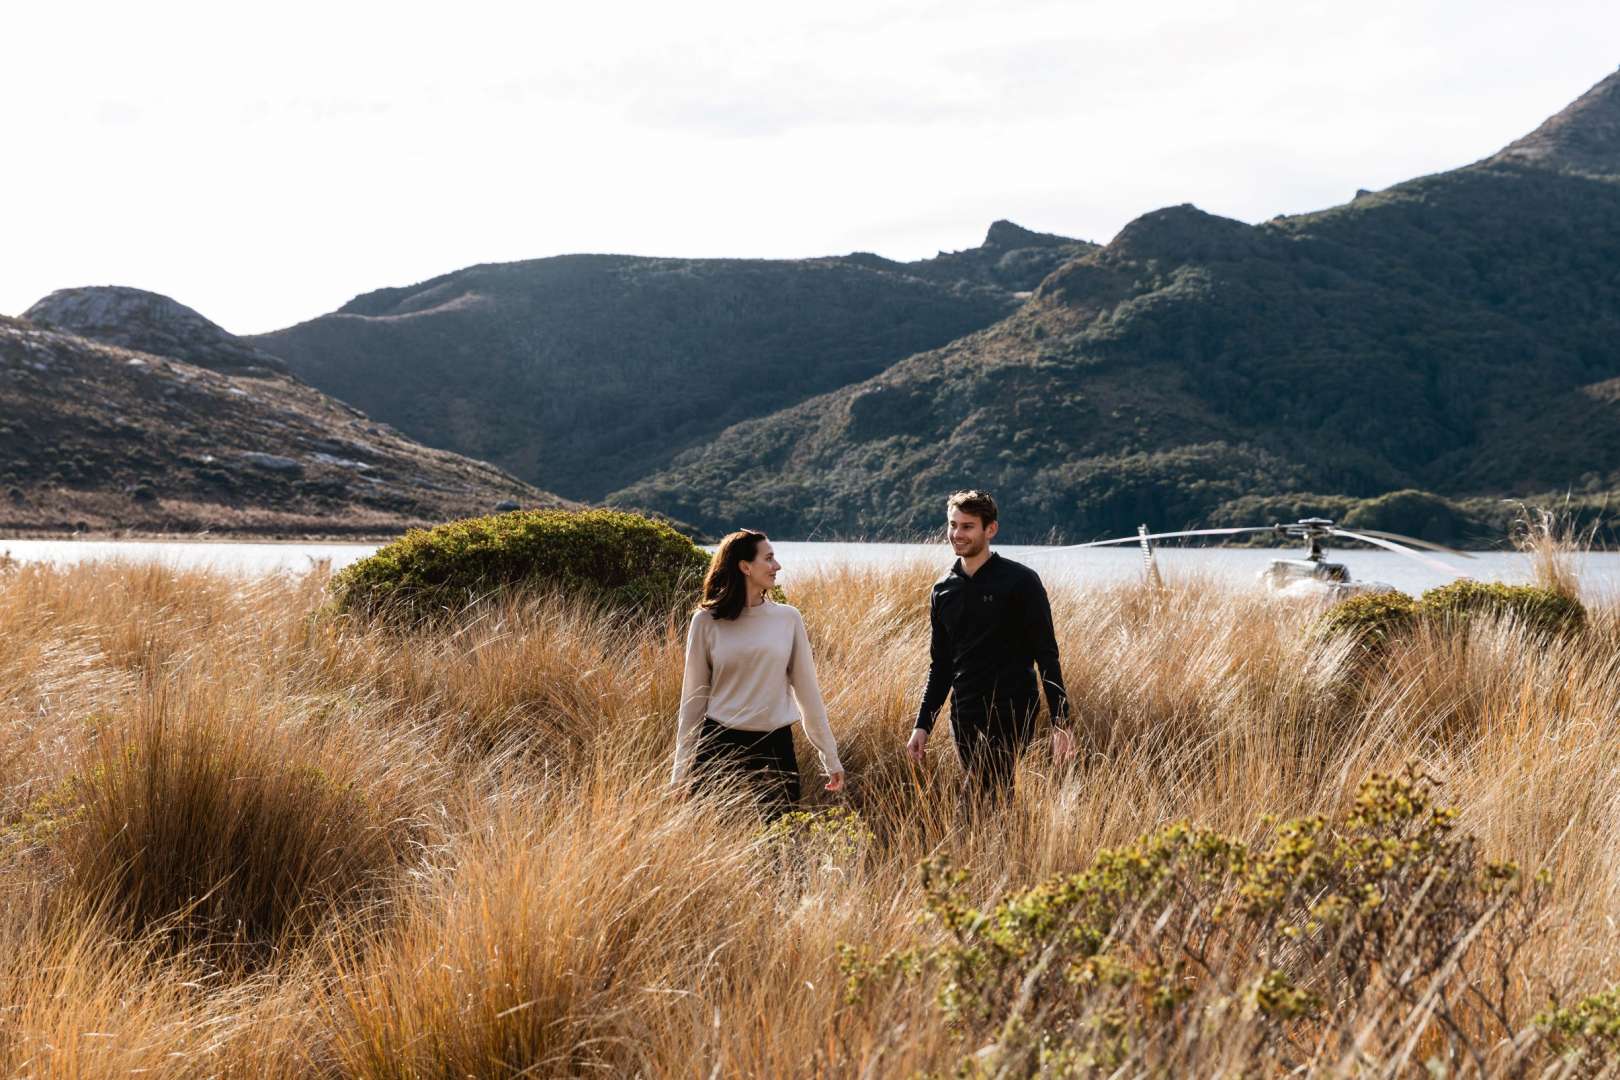 Experience two National Parks by Helicopter - Abel Tasman and Kahurangi